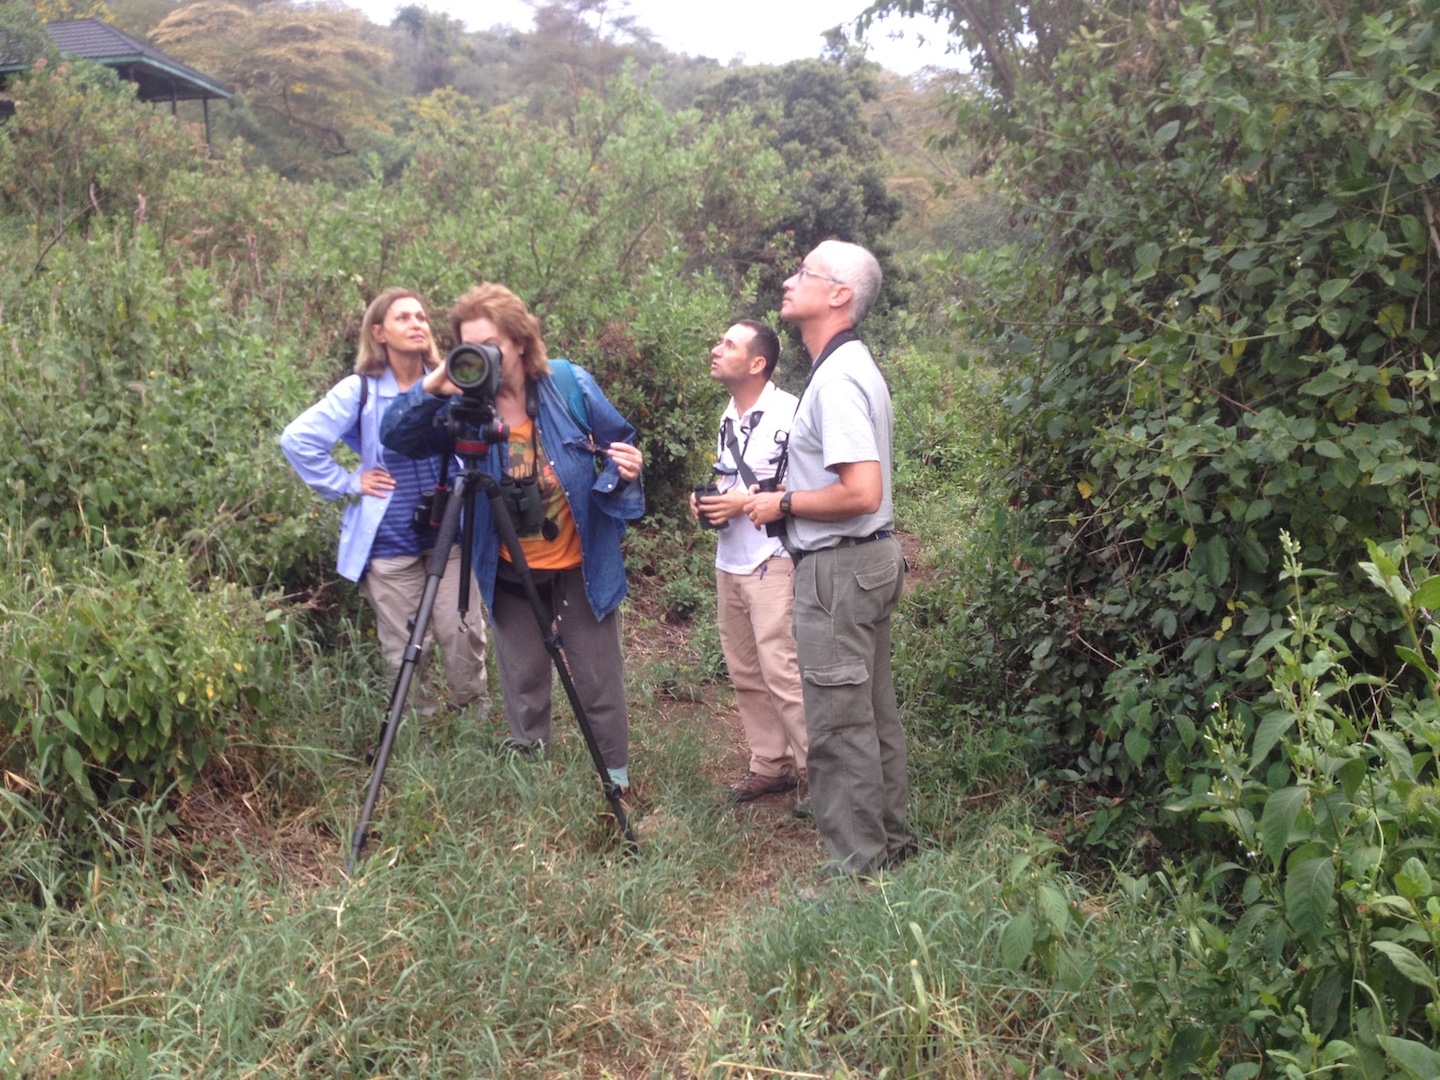 Israeli birders led YUVAL DAX, a bird guide and nature videographer. This was during the first trip to Kenya in September 2017. More about https://www.youtube.com/watch?v=jB6Qxu2WQXA 